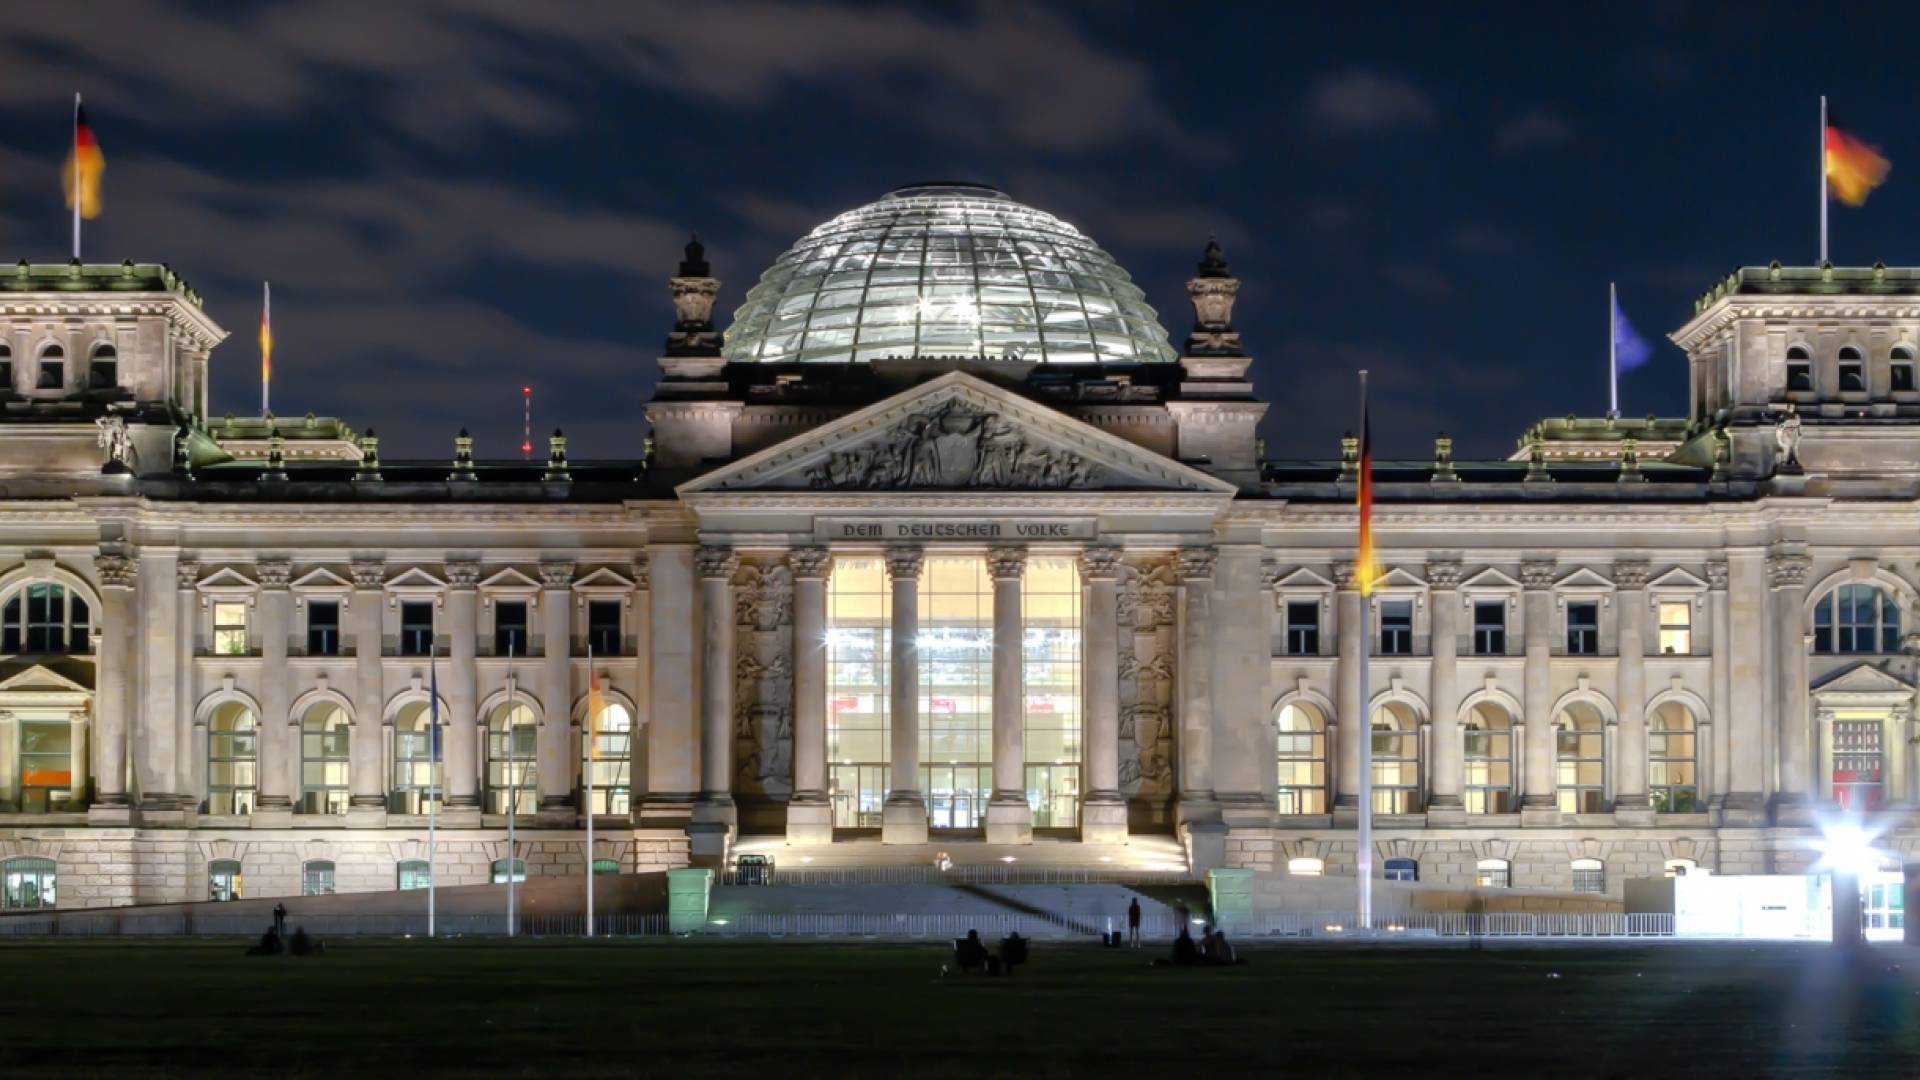 The German Reichstag building at night in modern day